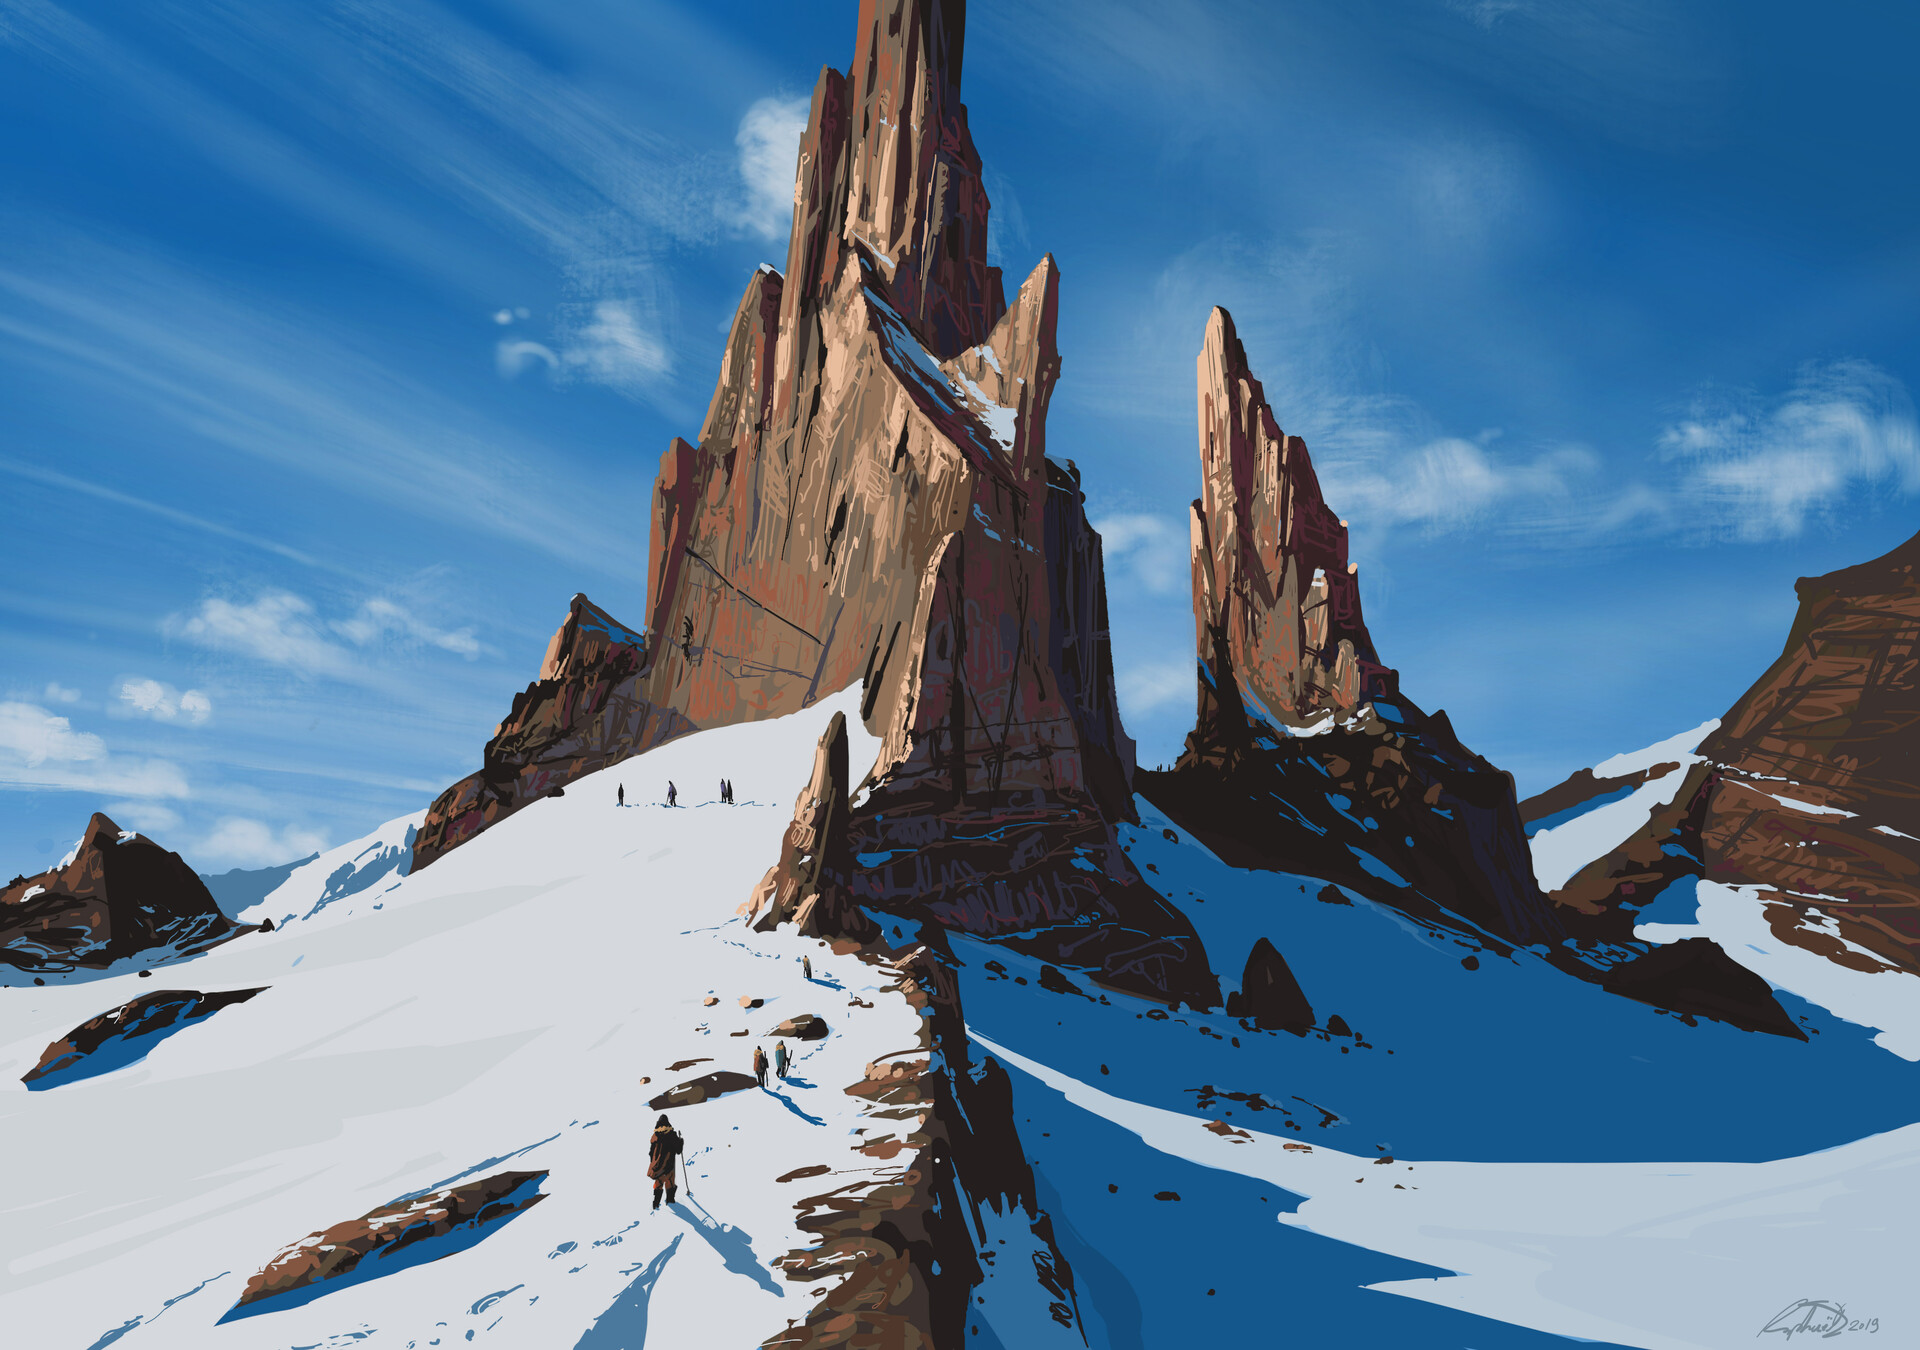 General 1920x1350 environment mountains snow people clouds